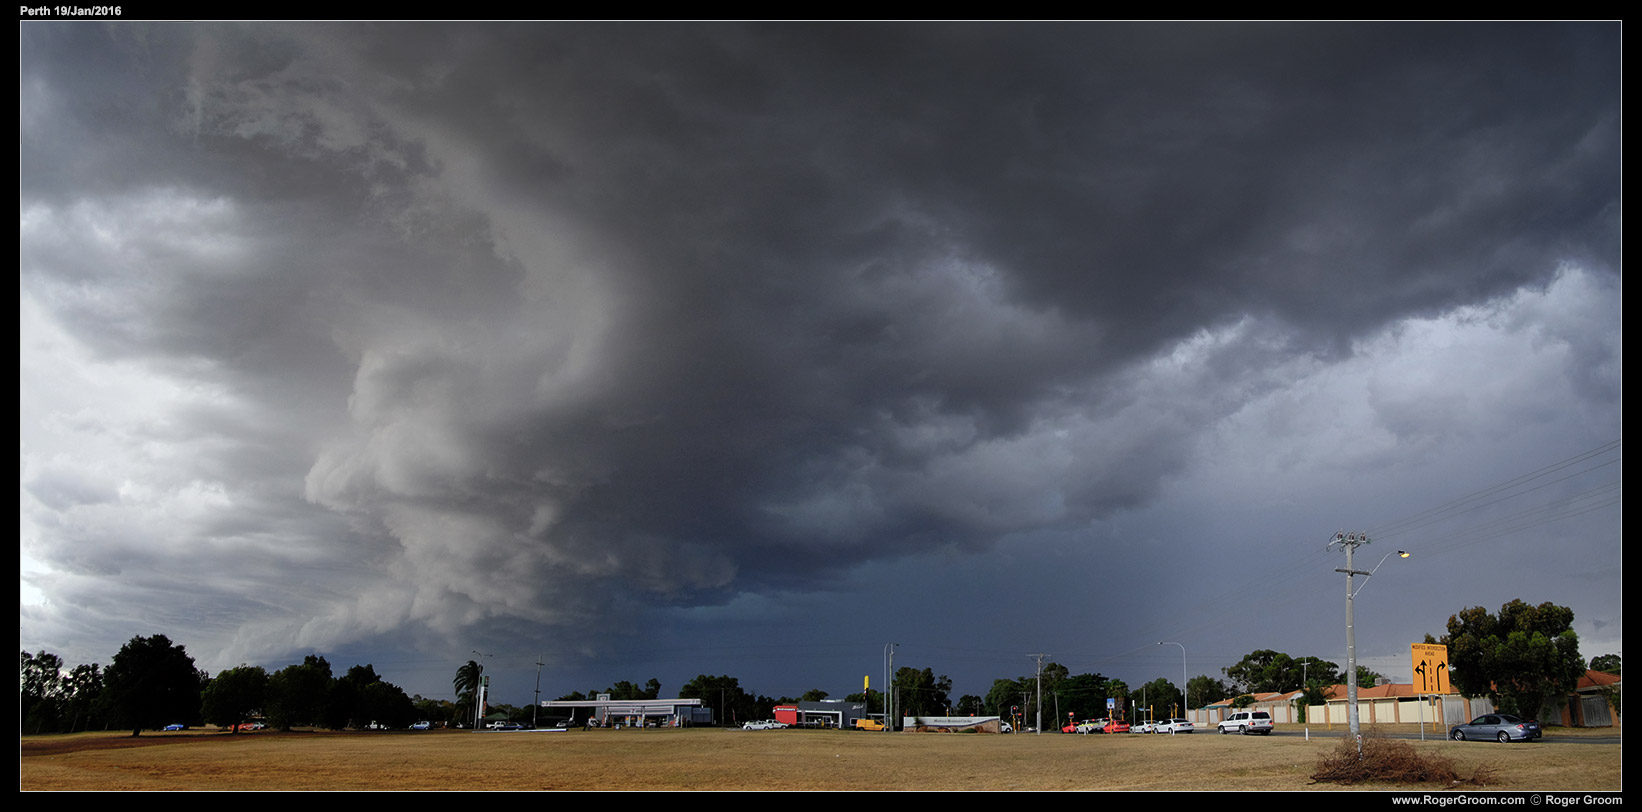 19th January 2016 Perth storm clouds.